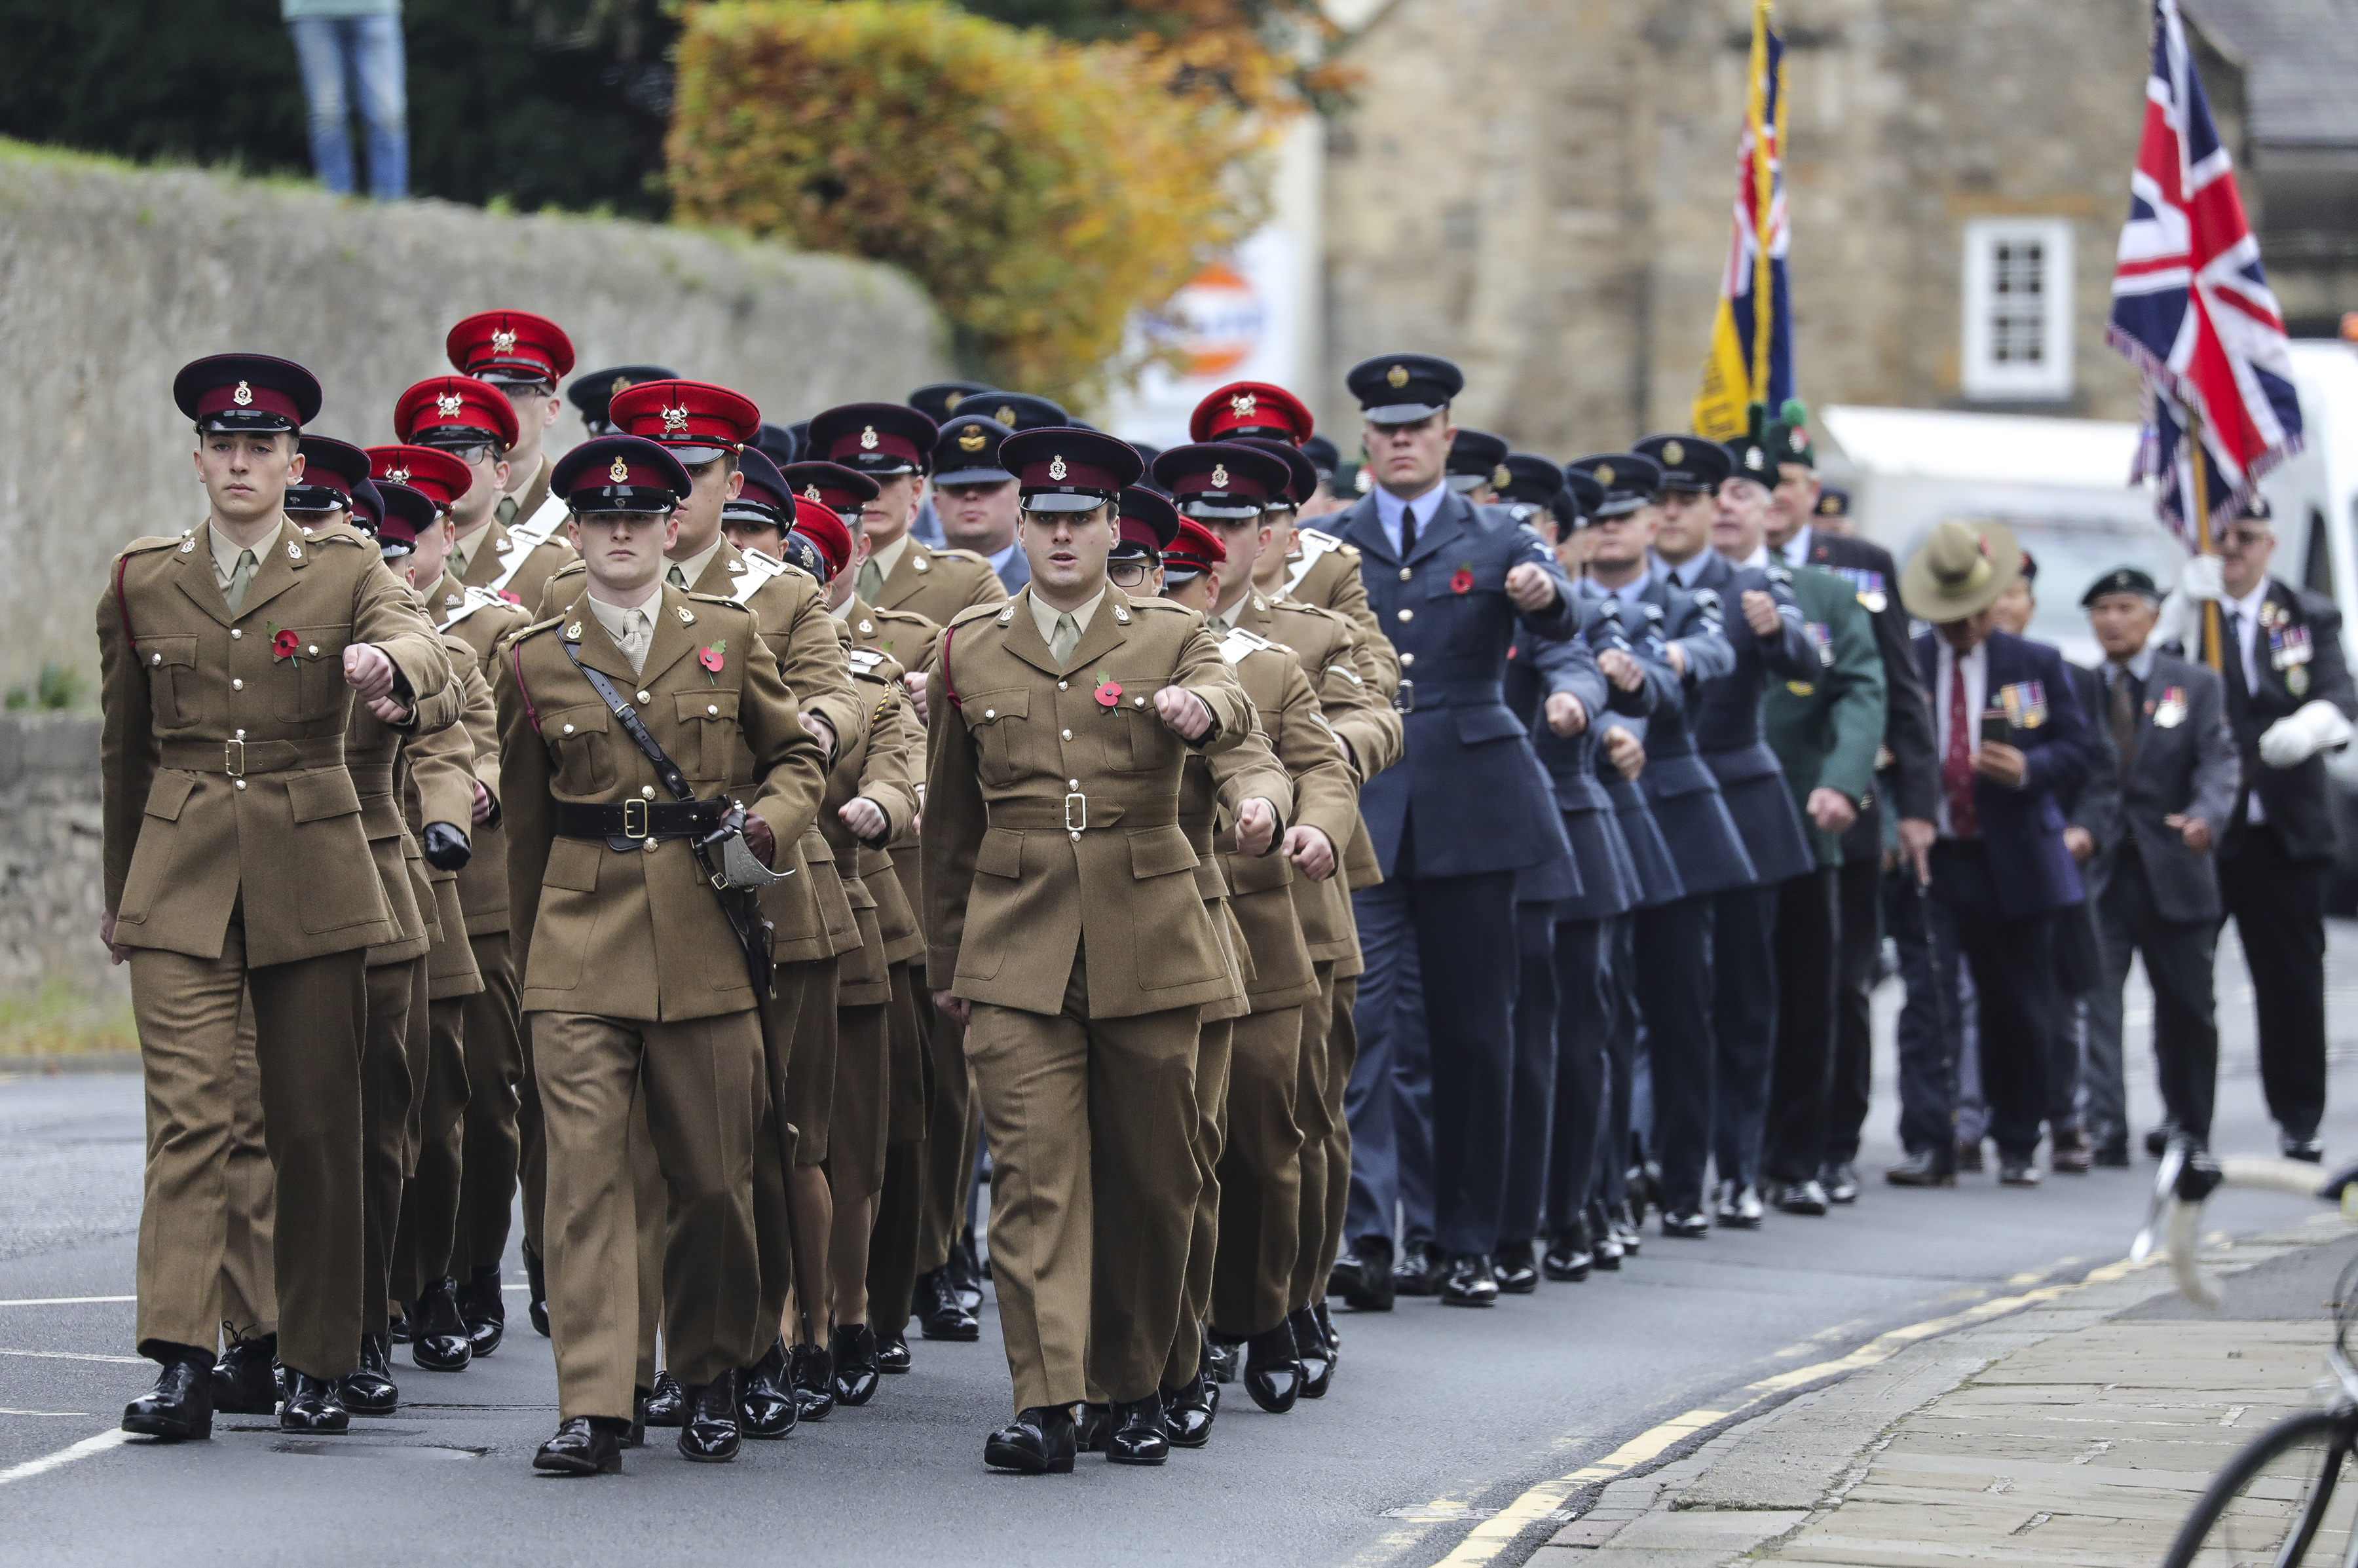 34 Squadron RAF Regiment join members of the Army during parade through the street.